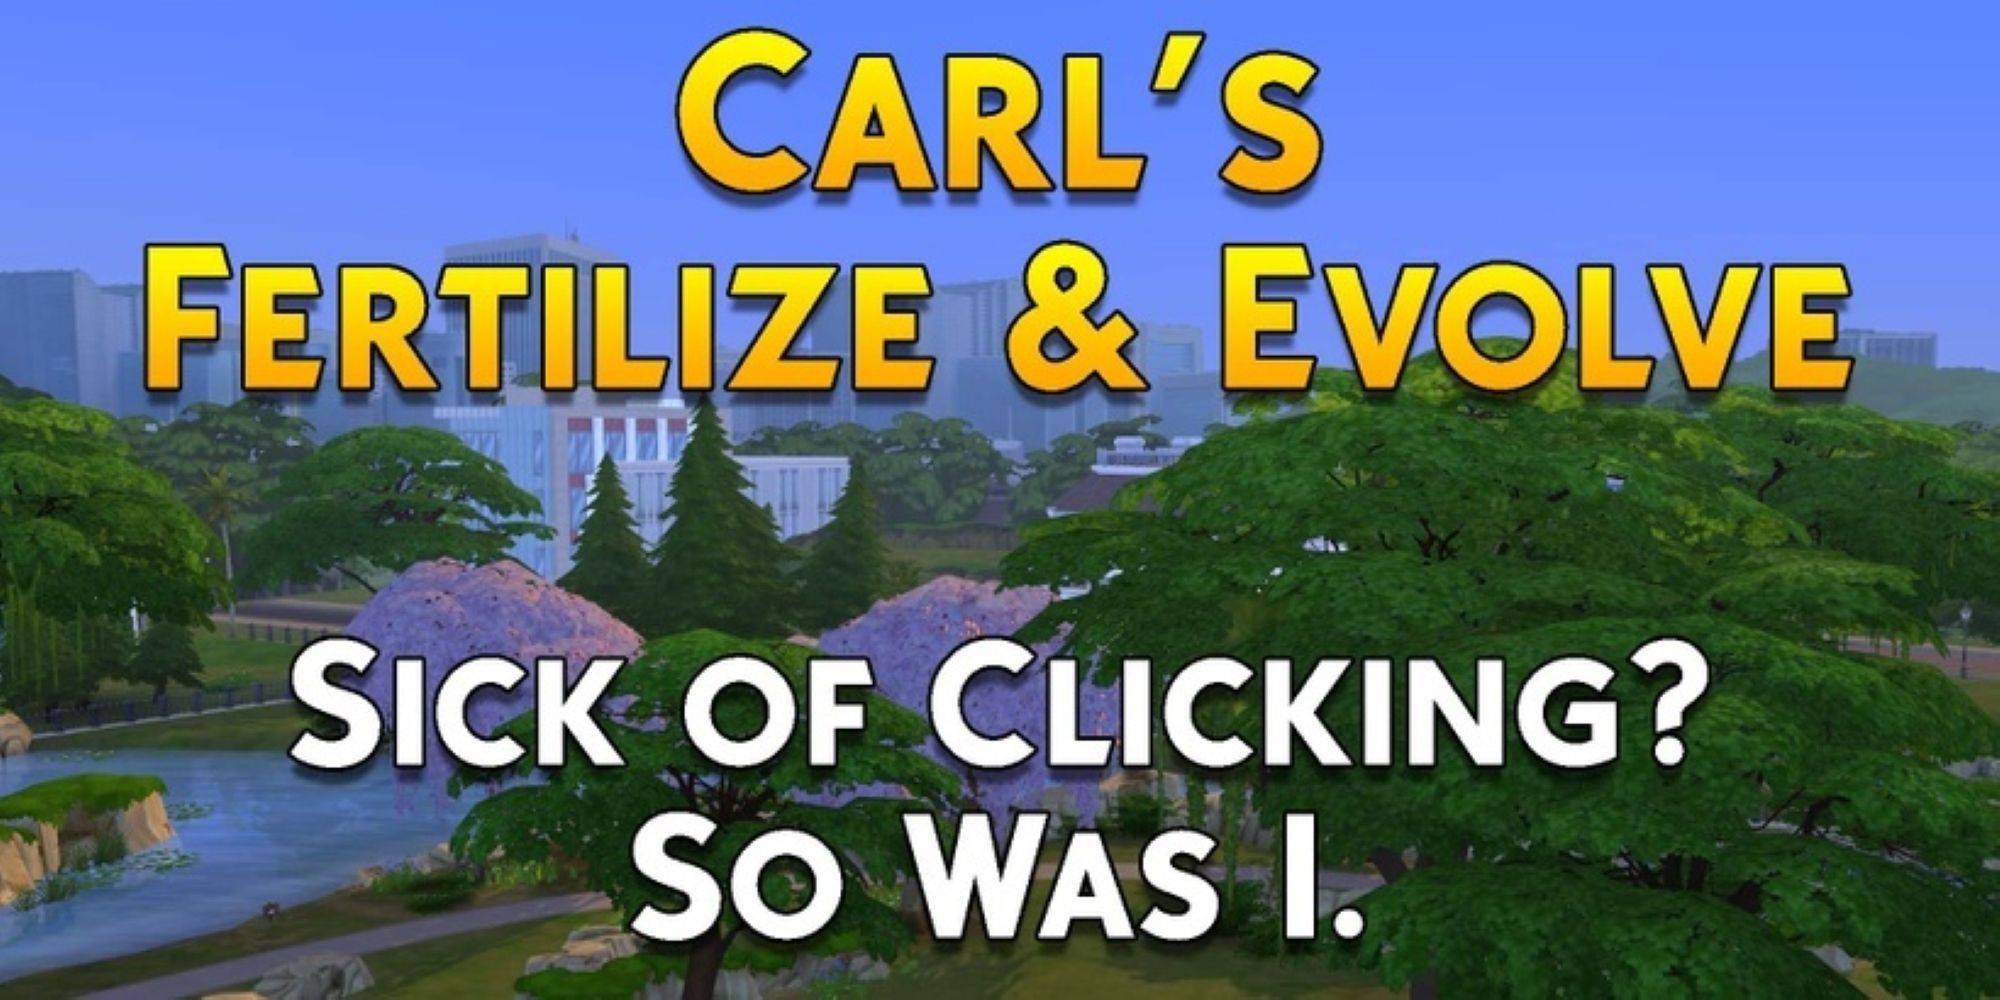 The Sims 4 scenery with text overlayed that says 'Carl's Fertilize & Evole' on it.